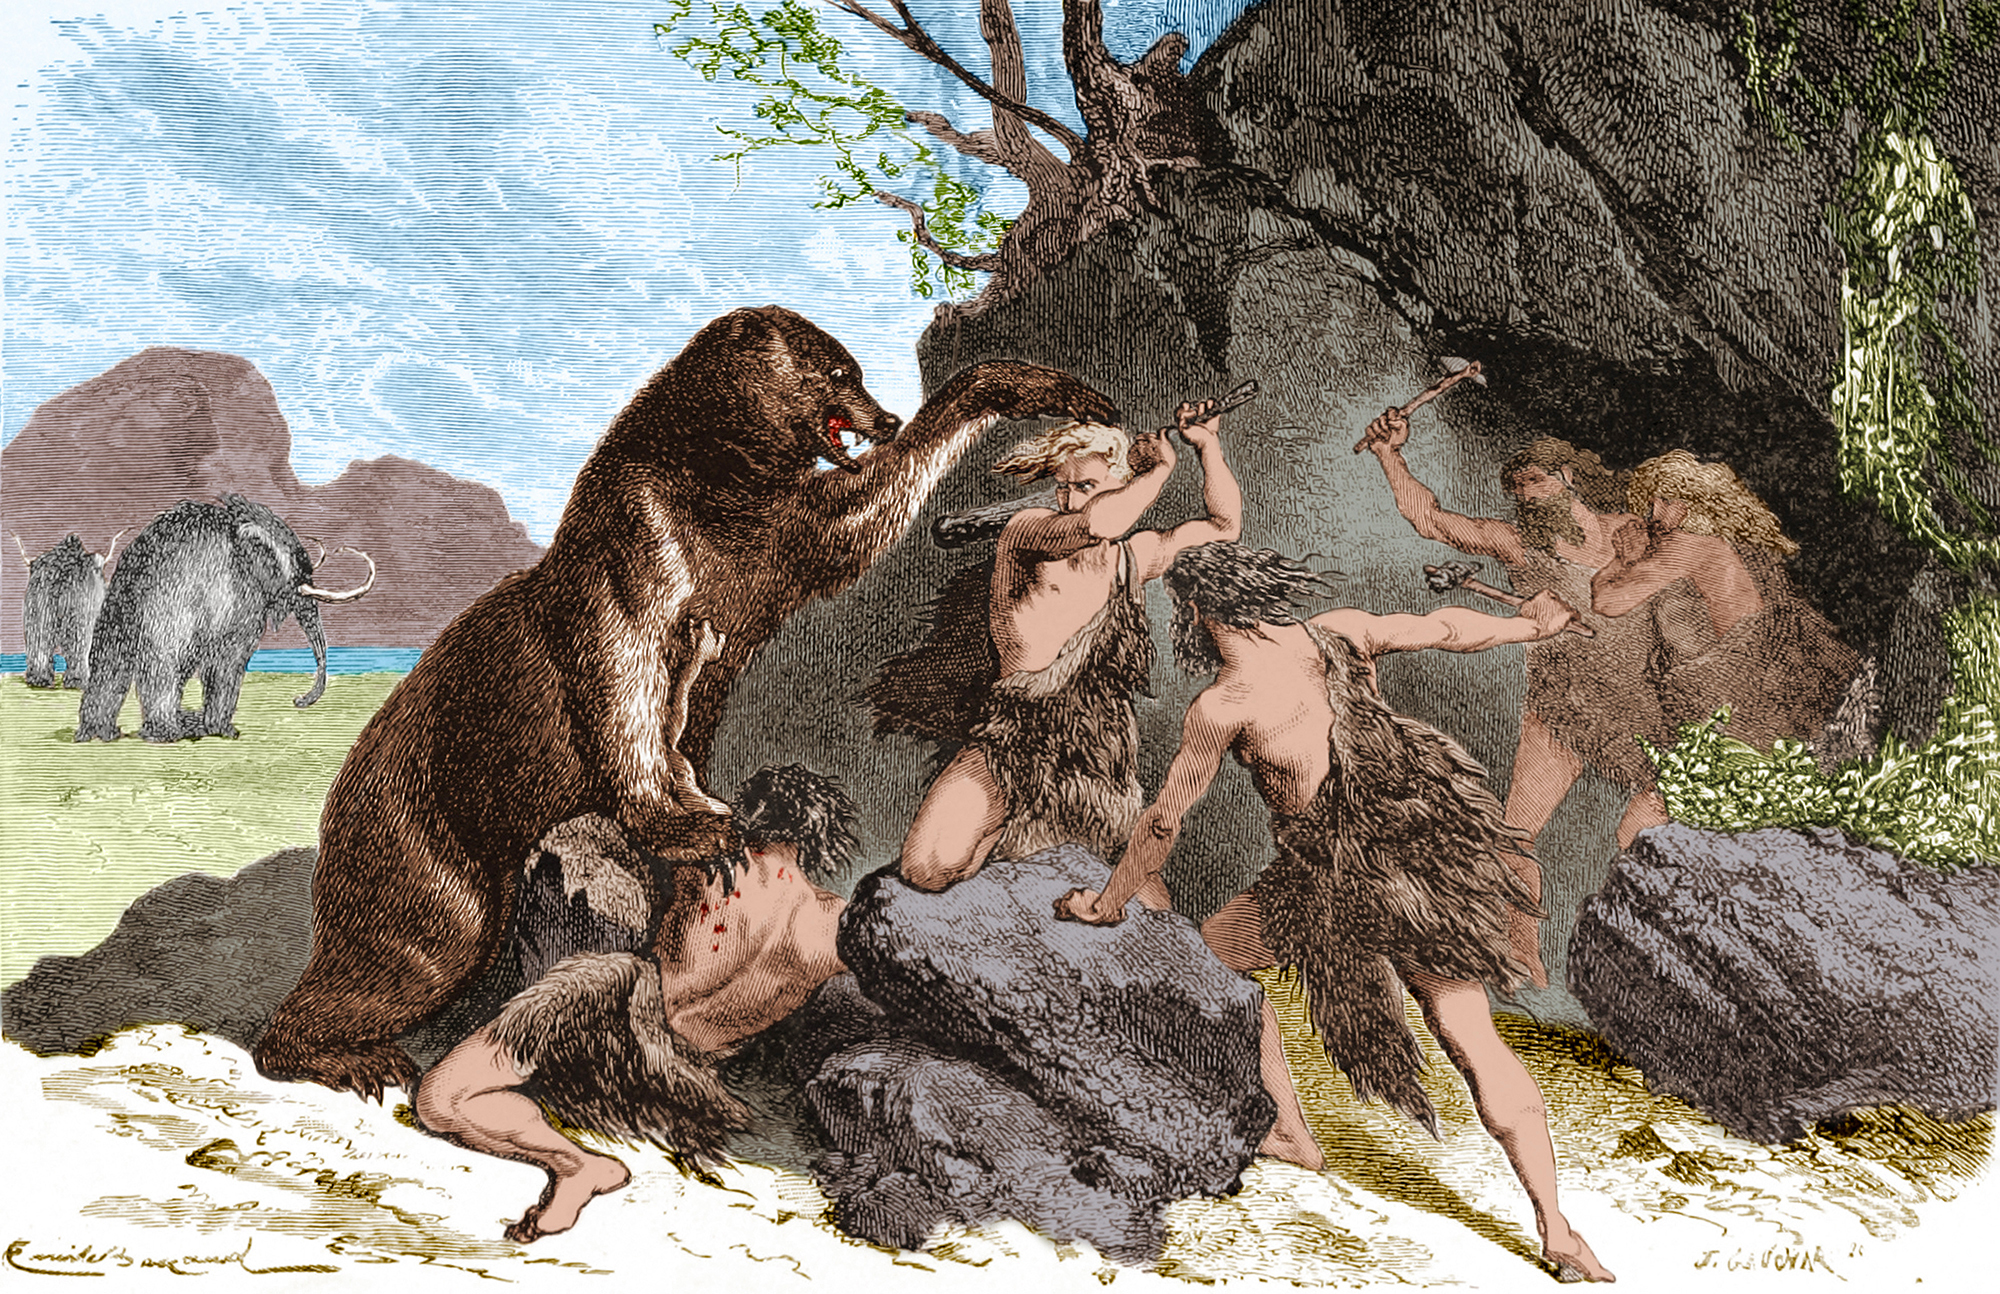 An illustration from 1870 shows Prehistoric men using wooden clubs and ston...